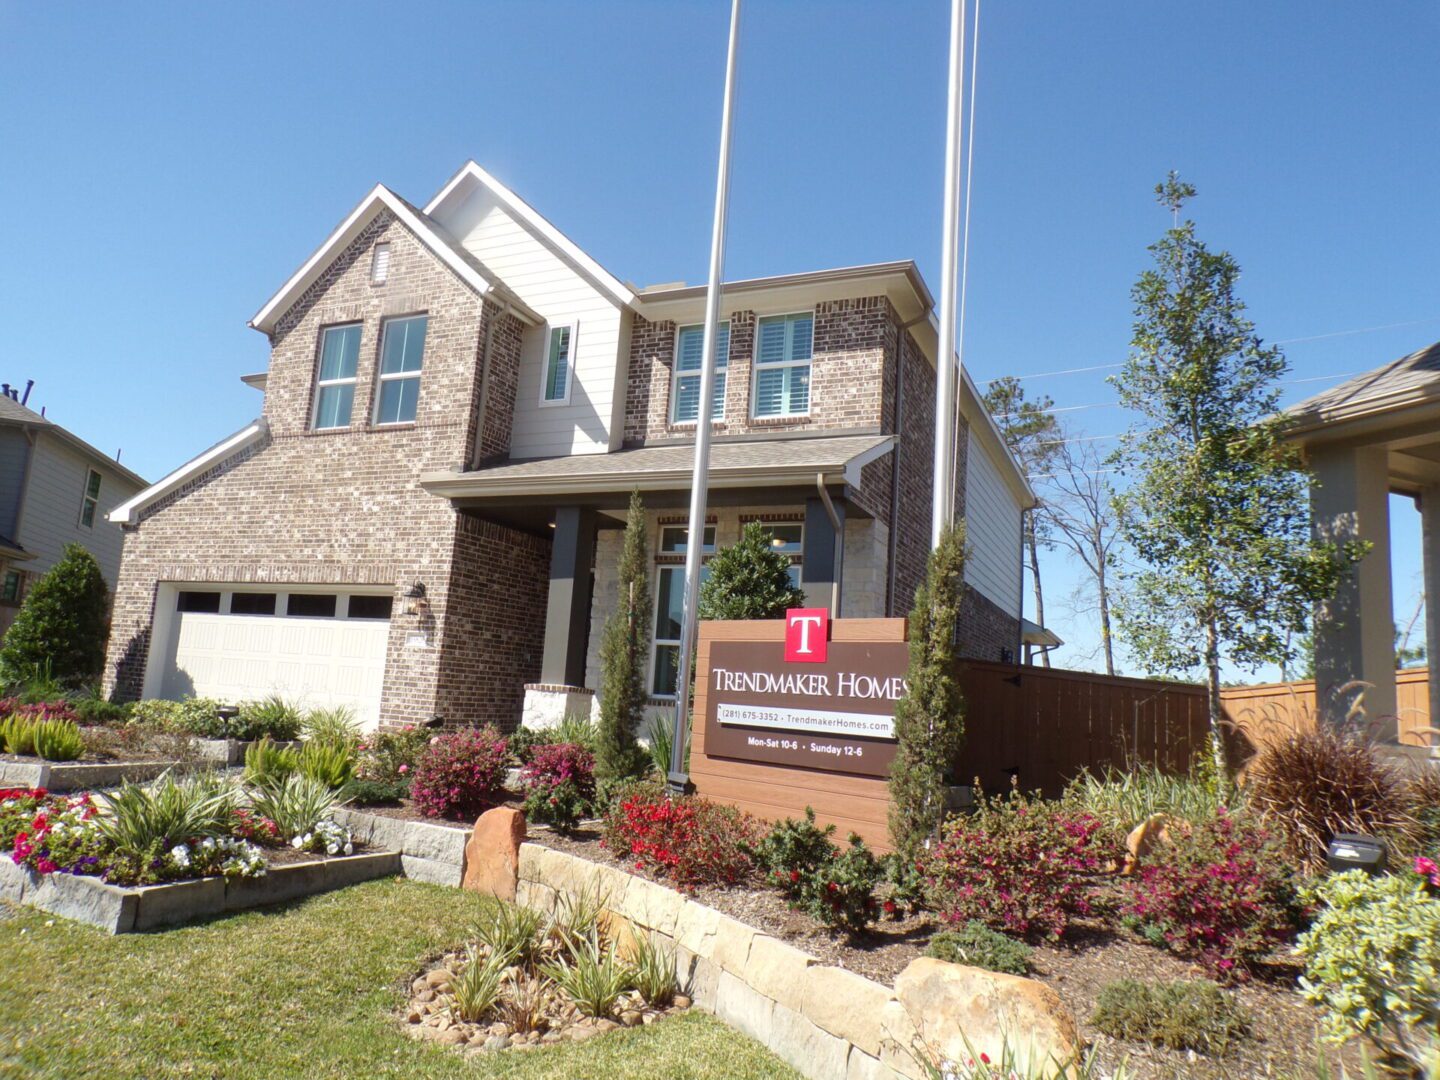 A new two-story brick house with a landscaped yard and a "Texas builders home" for sale sign in front.